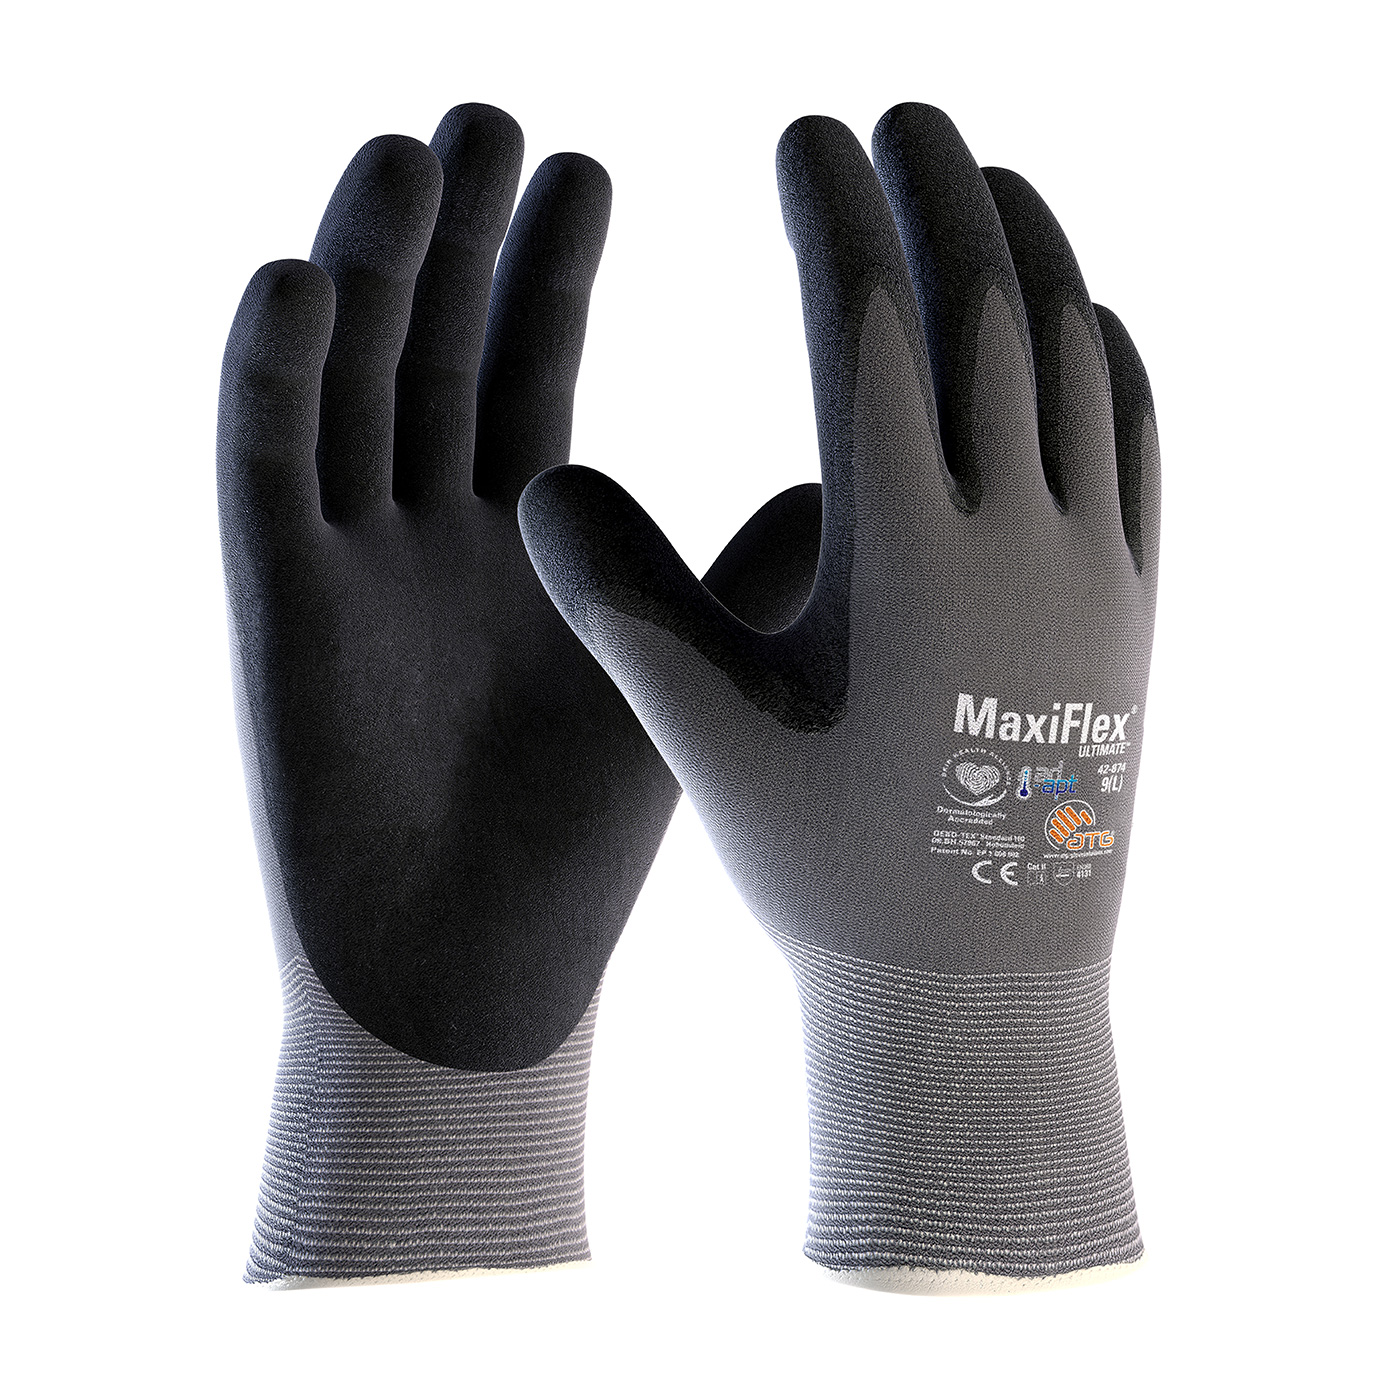 PIP 42-874/XL MaxiFlex Ultimate AD-APT Seamless Knit Nylon/Lycra Glove with Nitrile Coated MicroFoam Grip on Palm & Fingers and AD-APT Technology - X-Large PID-42874XL